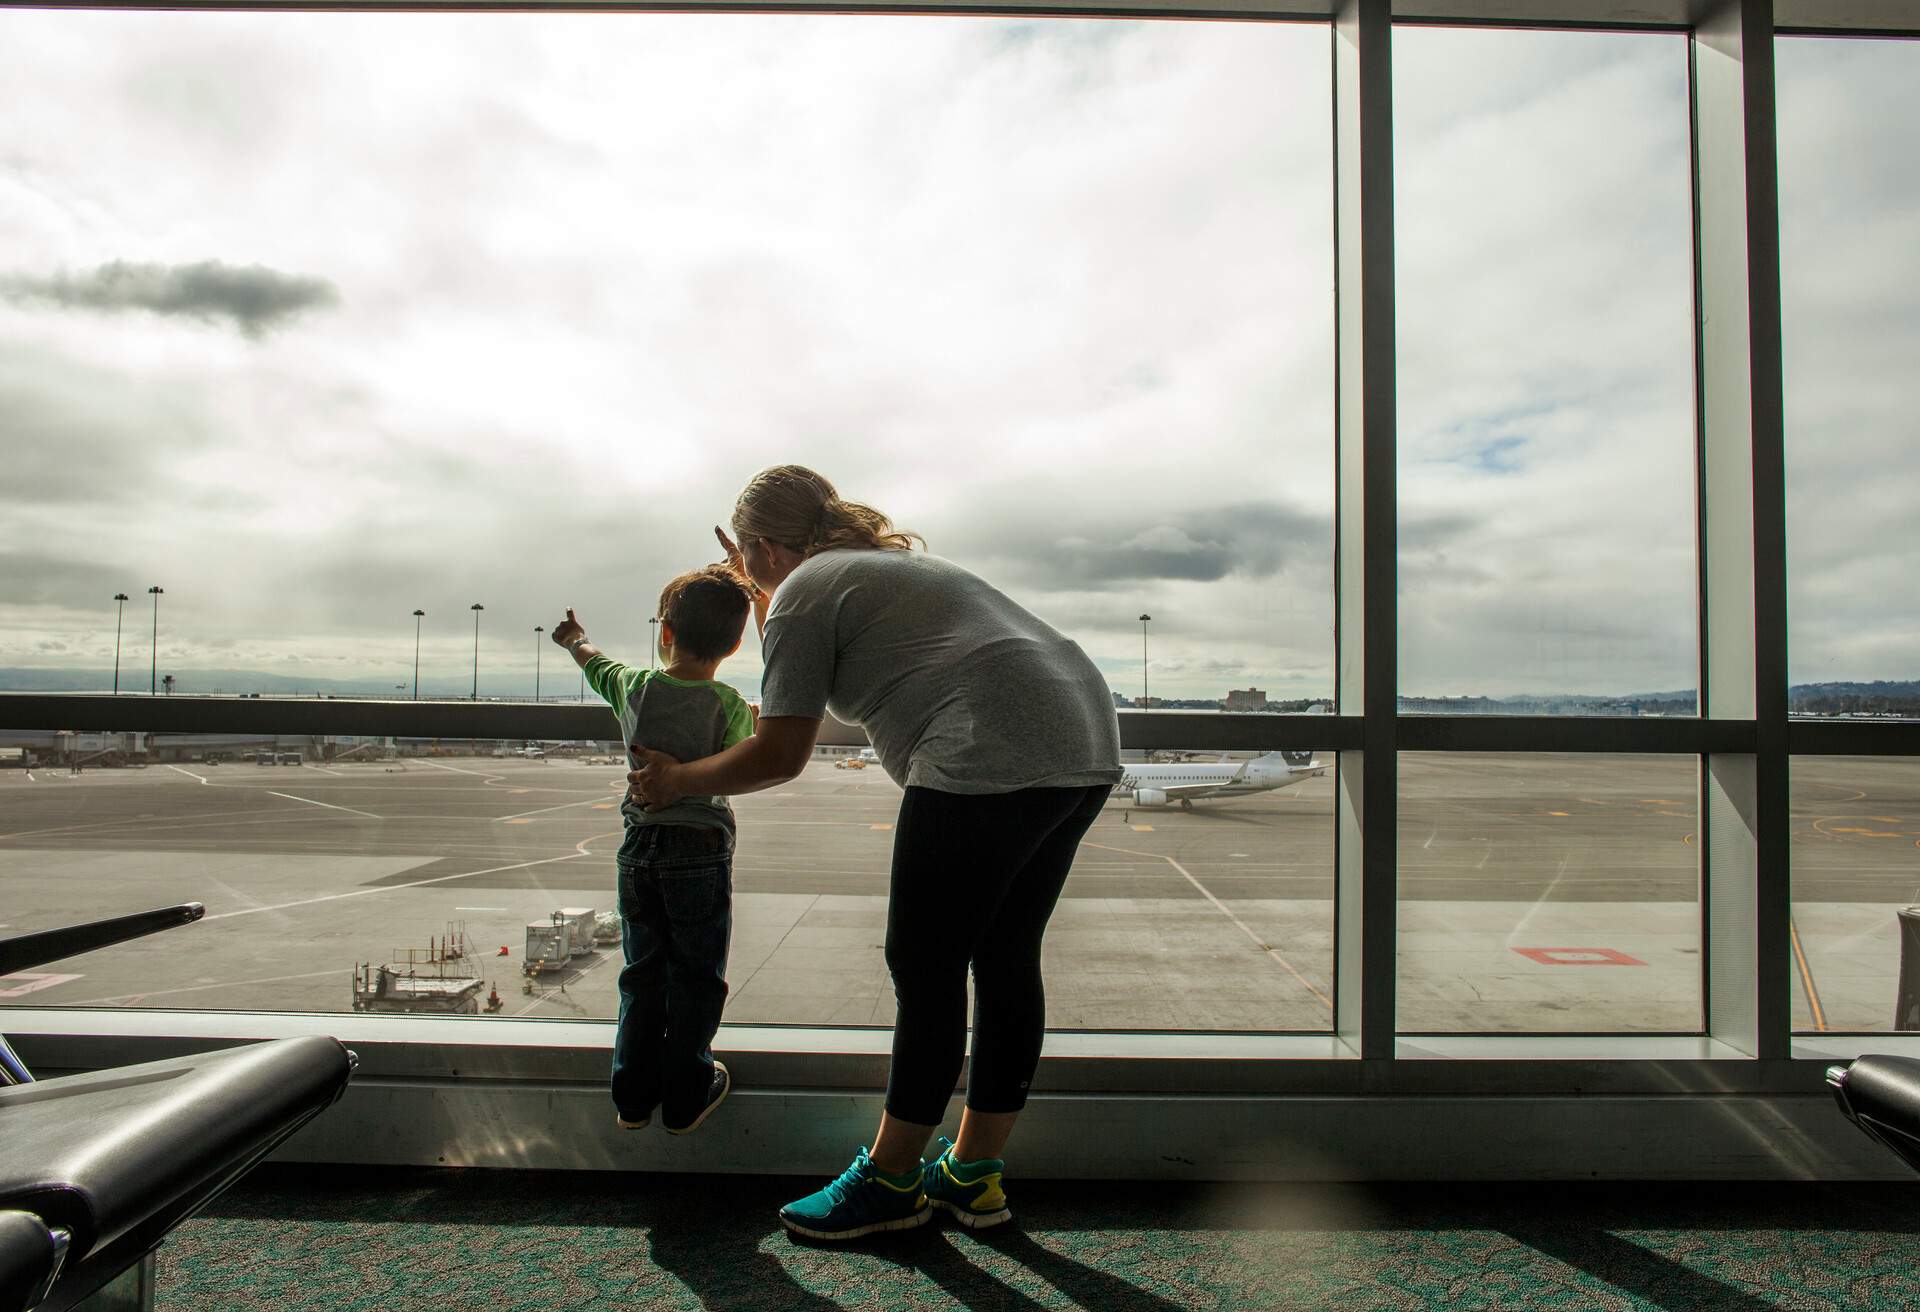 A mother and his son are pointing at the clouds on the airport's glass window.